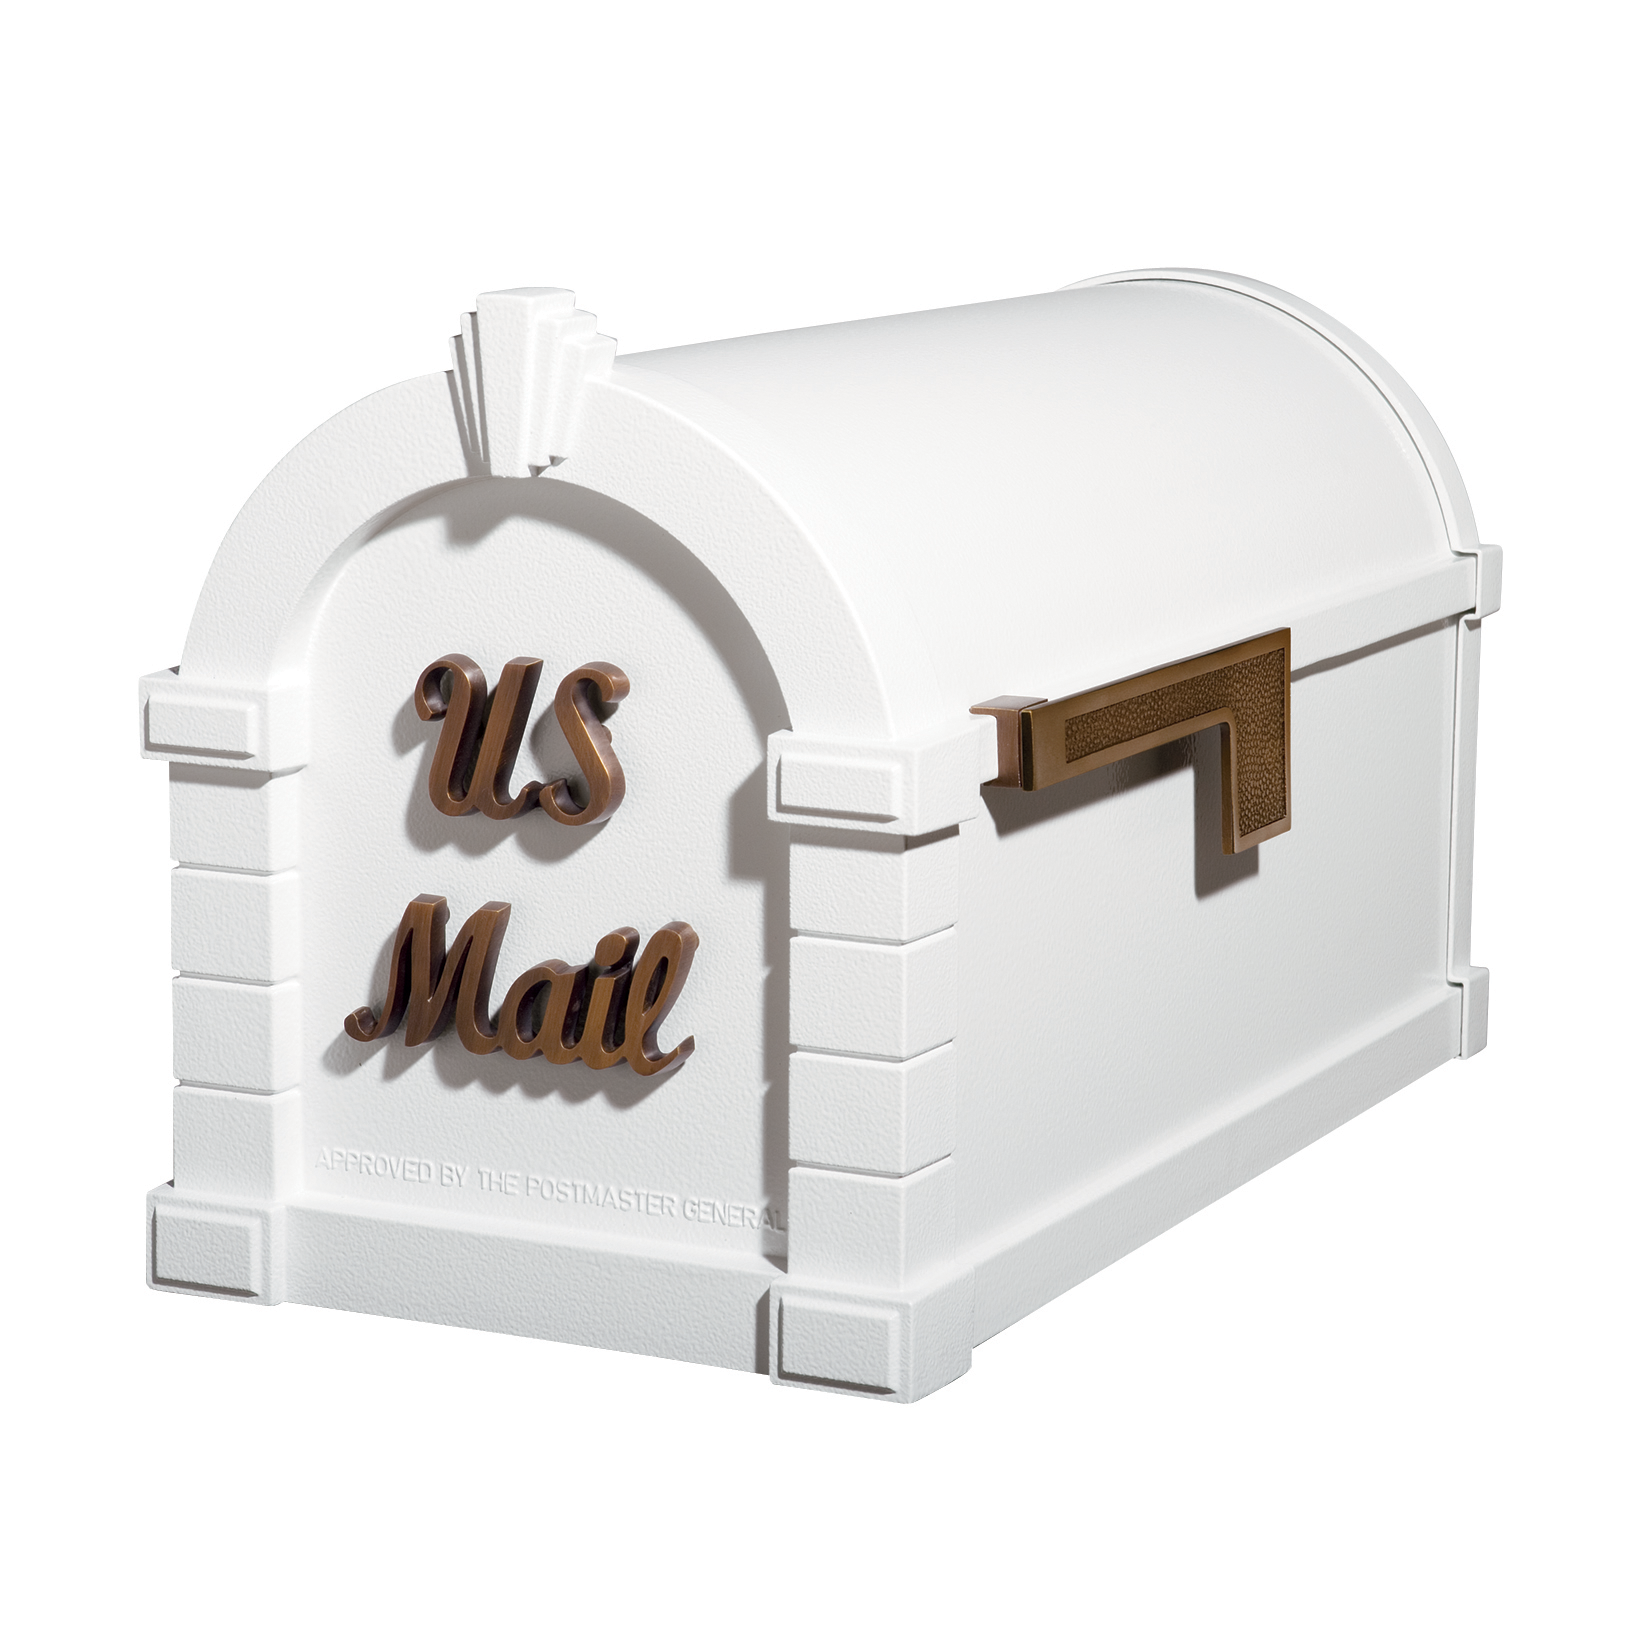 Gaines Signature Keystone Mailboxes - White with Antique Bronze